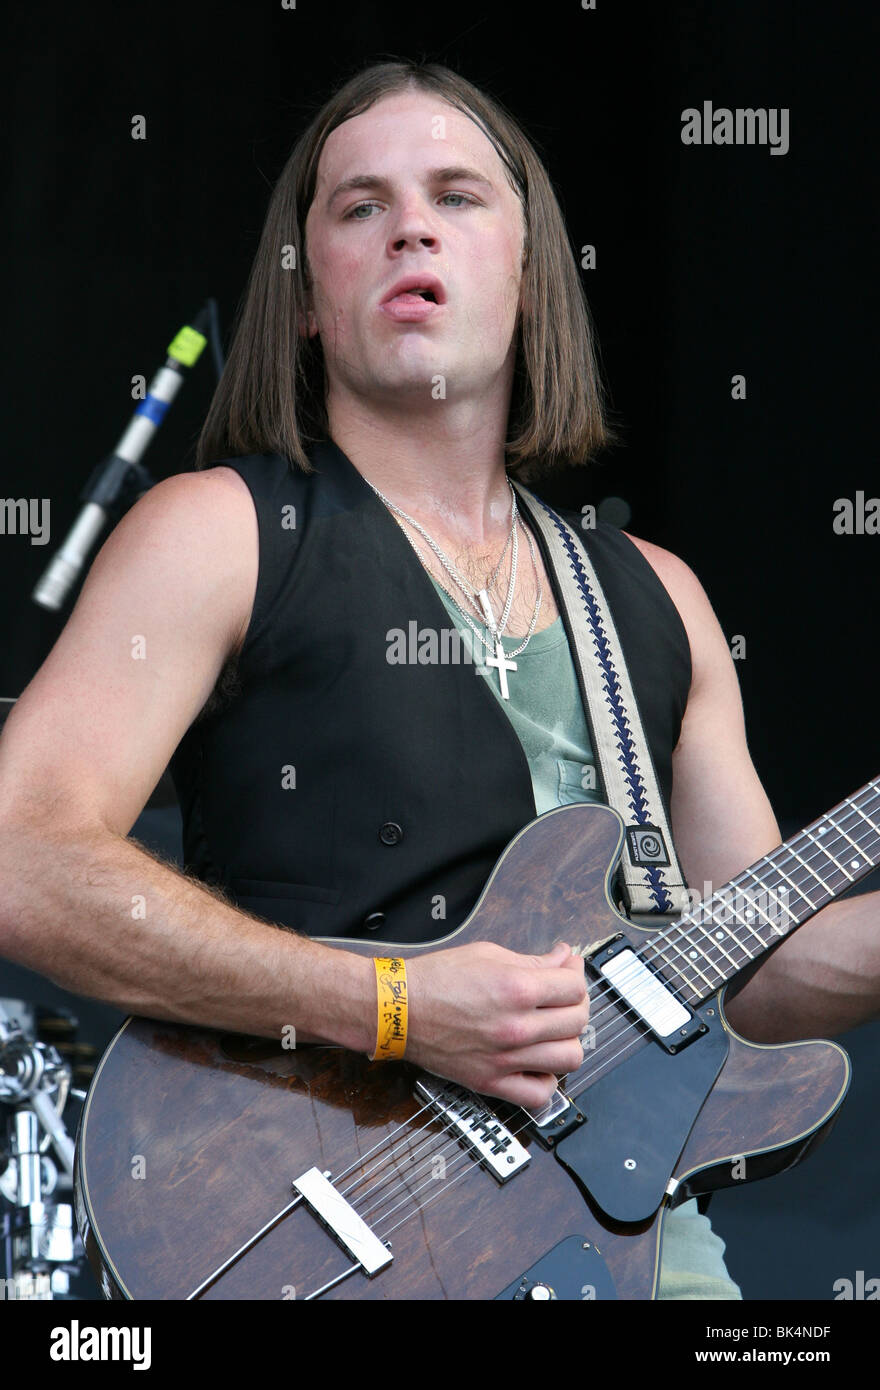 Caleb Bollowill of Kings of Leon performs during a concert. Stock Photo